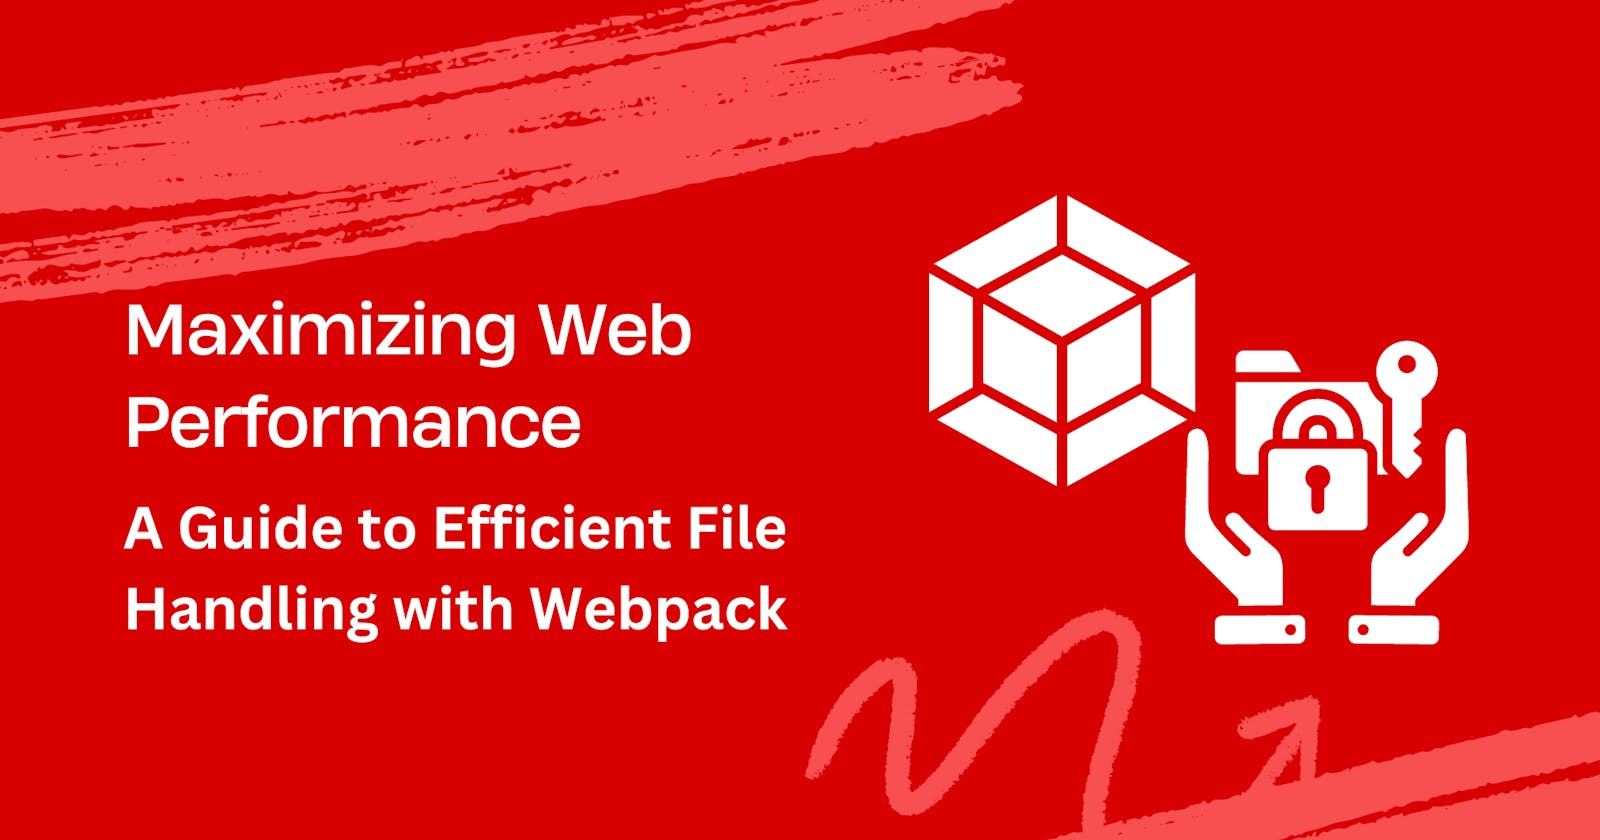 Maximizing Web Performance: A Guide to Efficient File Handling with Webpack